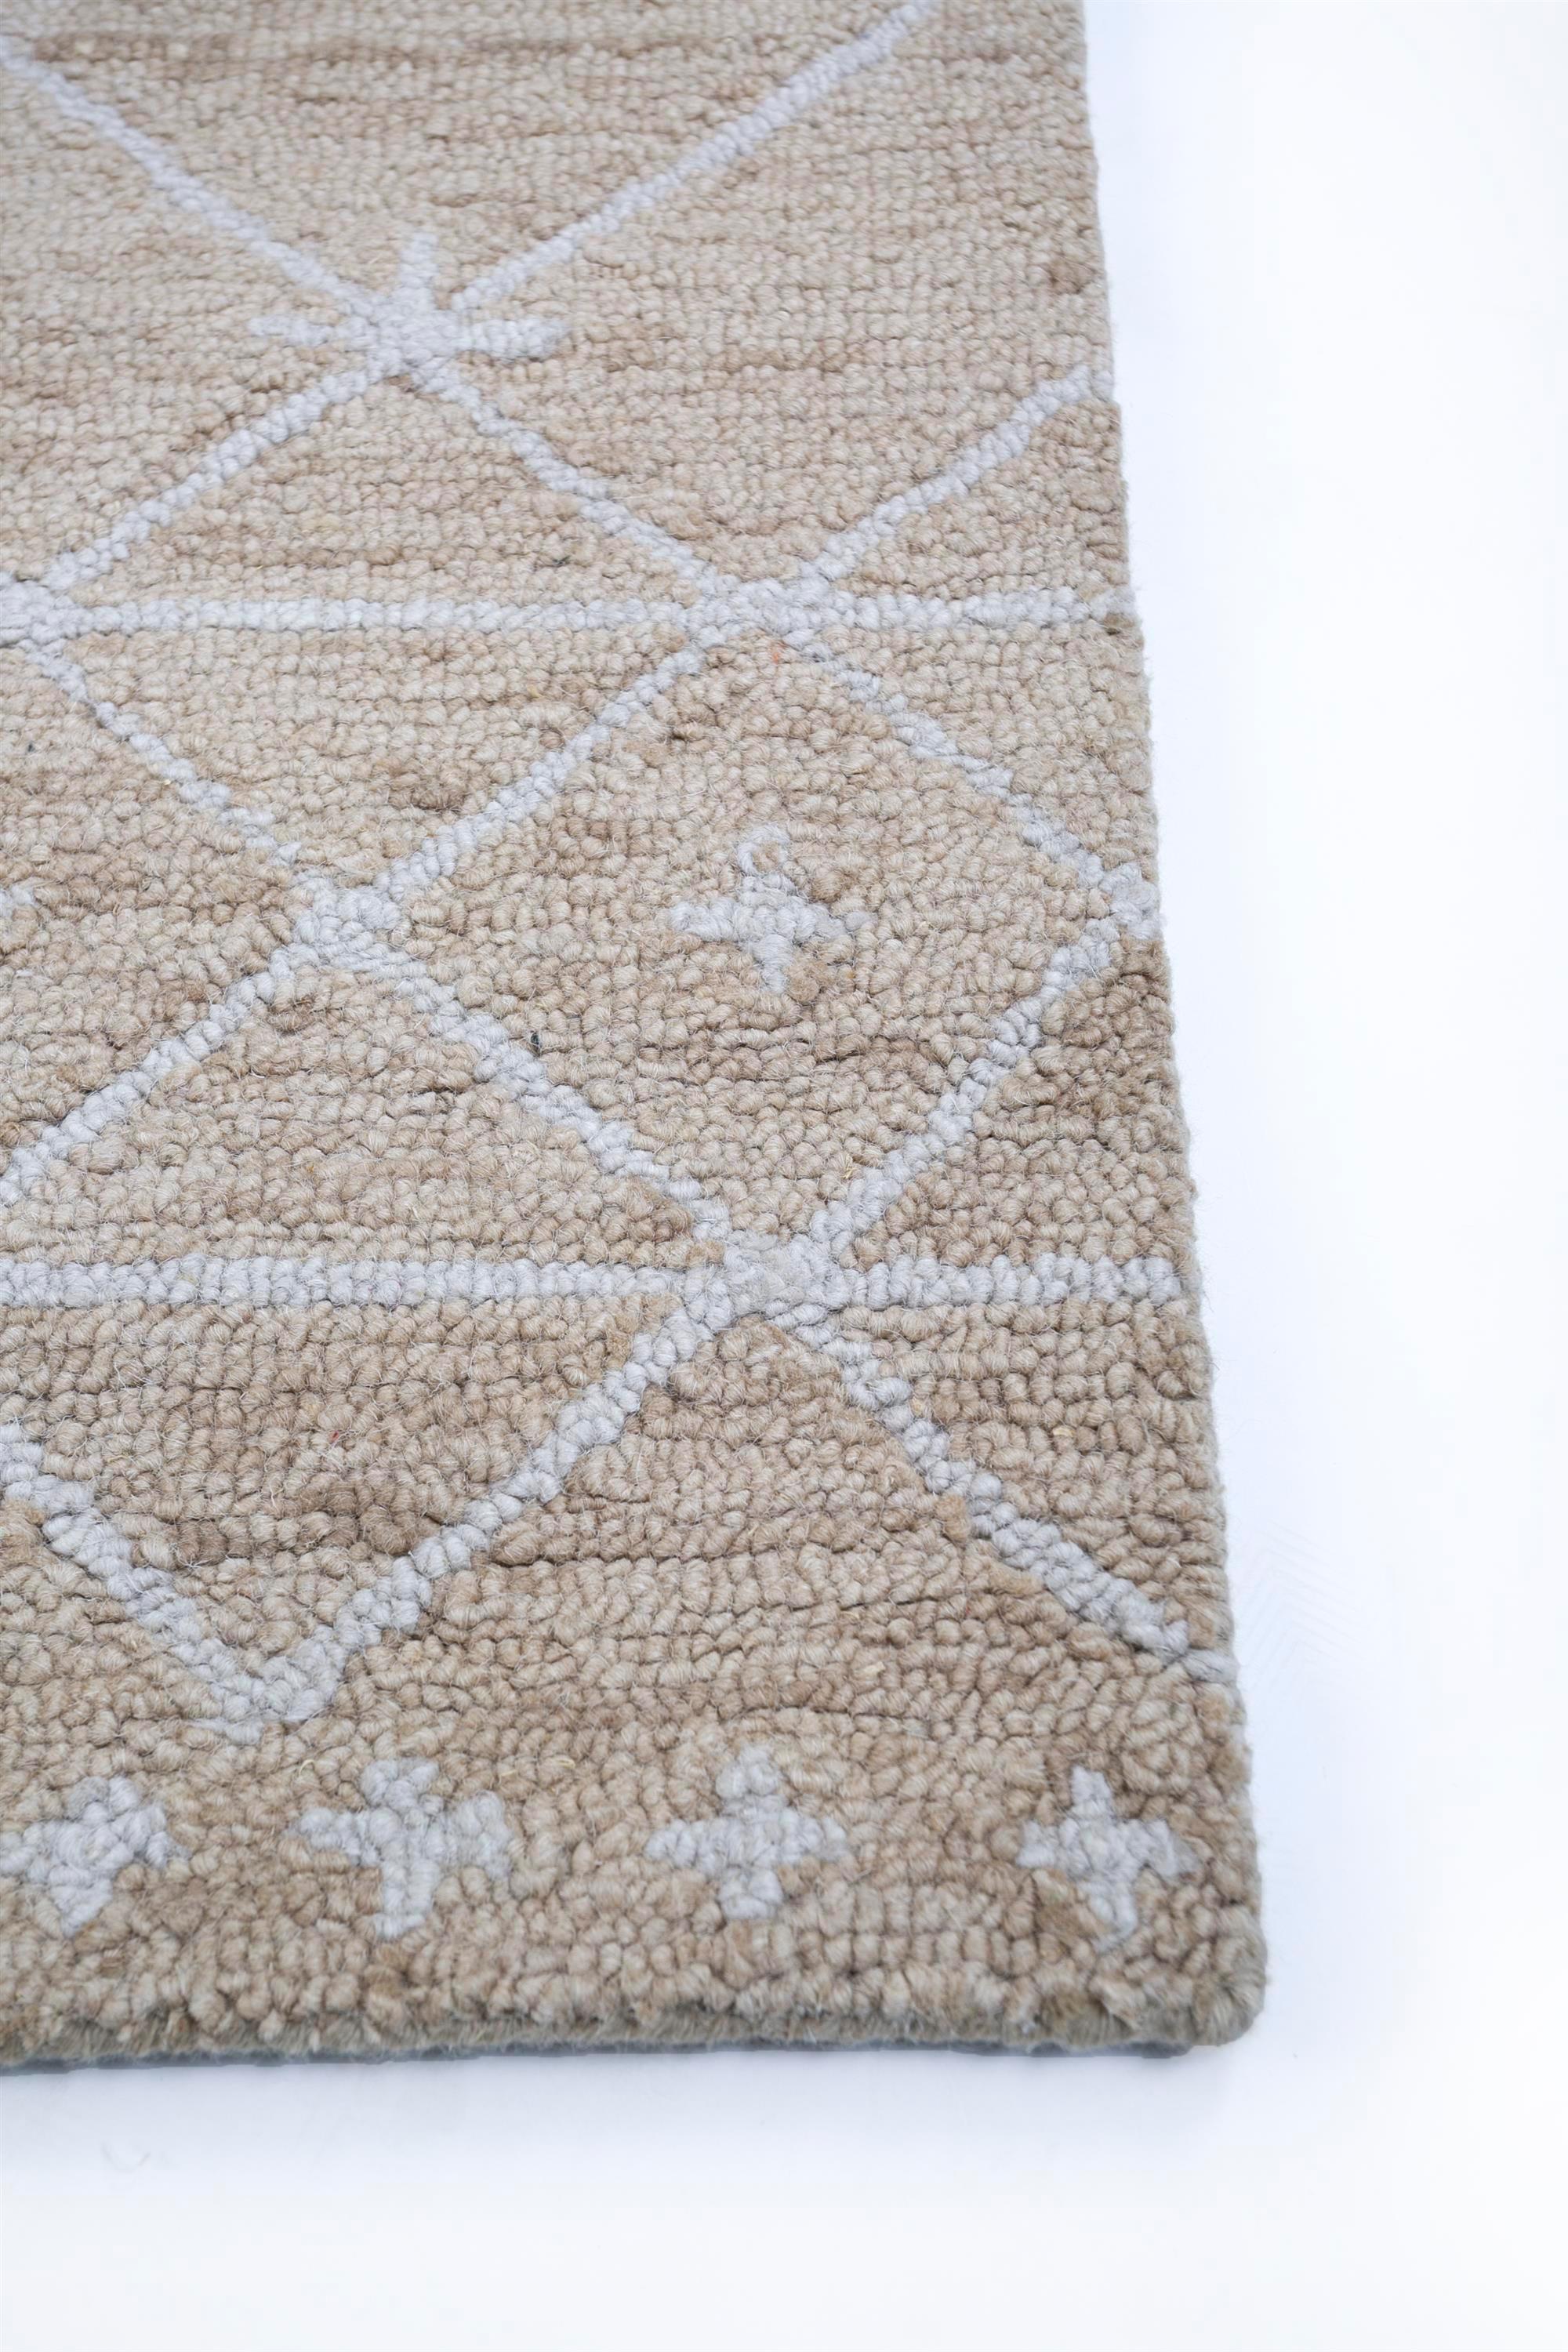 Embark on a journey of design excellence with our Handtufted Rug, a masterpiece in soft beige and white, resembling a work of abstract art on a cloth canvas. This rug is the epitome of contemporary elegance, designed for modern urban homes. Crafted